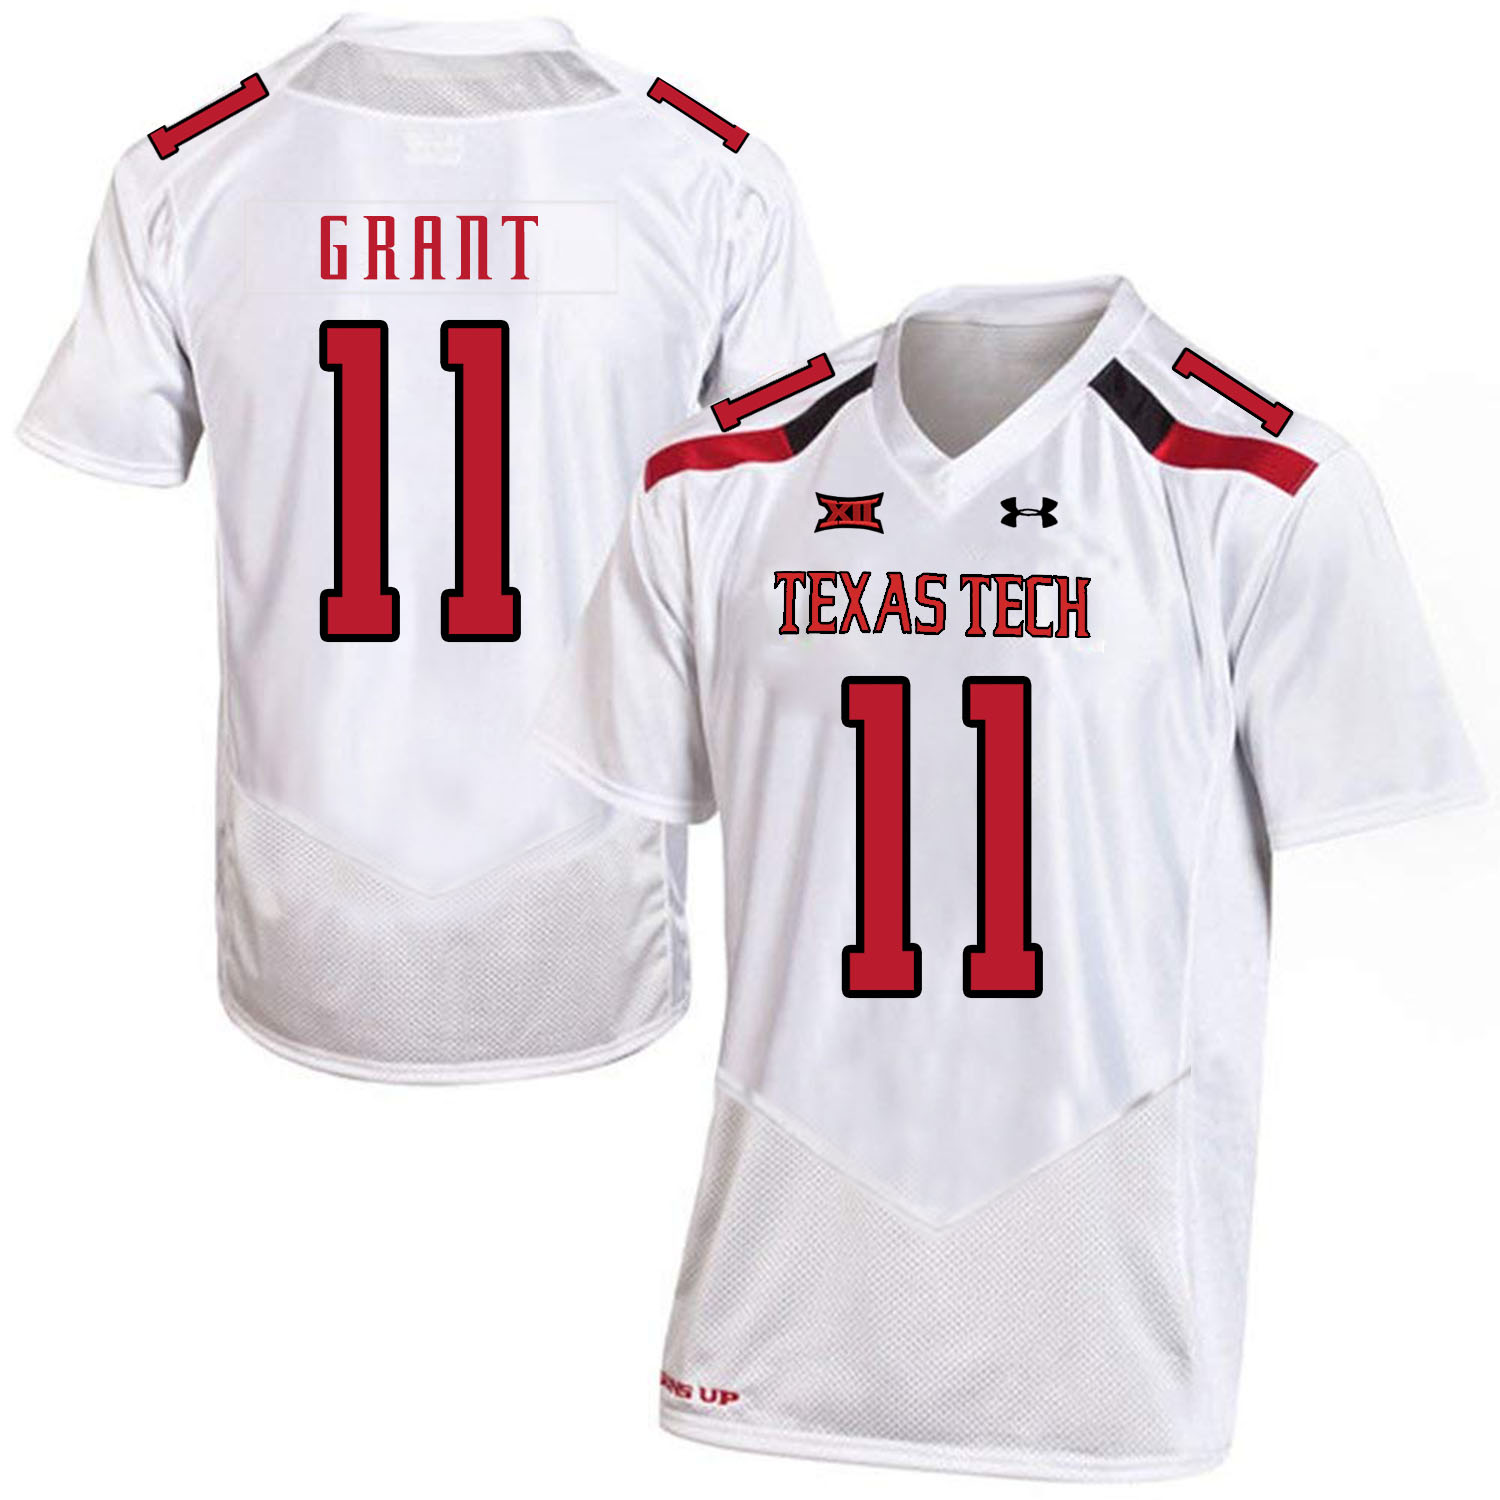 Texas Tech Red Raiders 11 Jakeem Grant White College Football Jersey